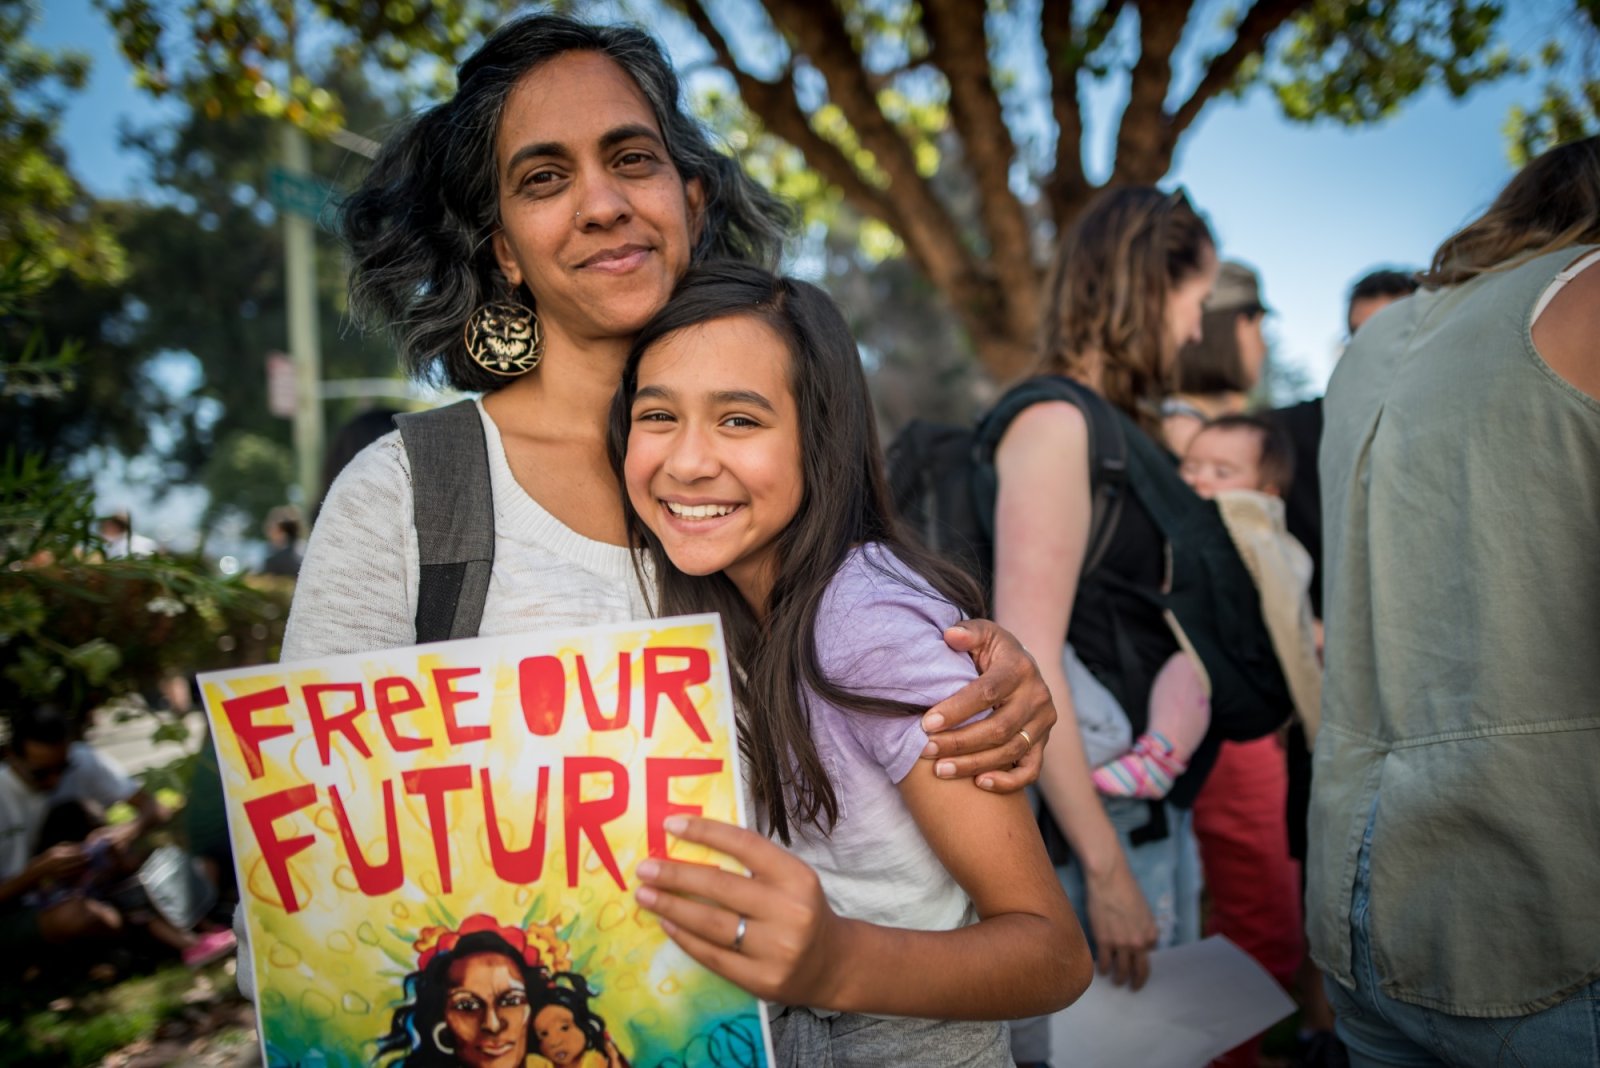 An older woman is holding a younger girl while both of them look directly at the camera and smiling. They are participating in a protest and are holding a sign that says free our future. They are outside in the daytime.